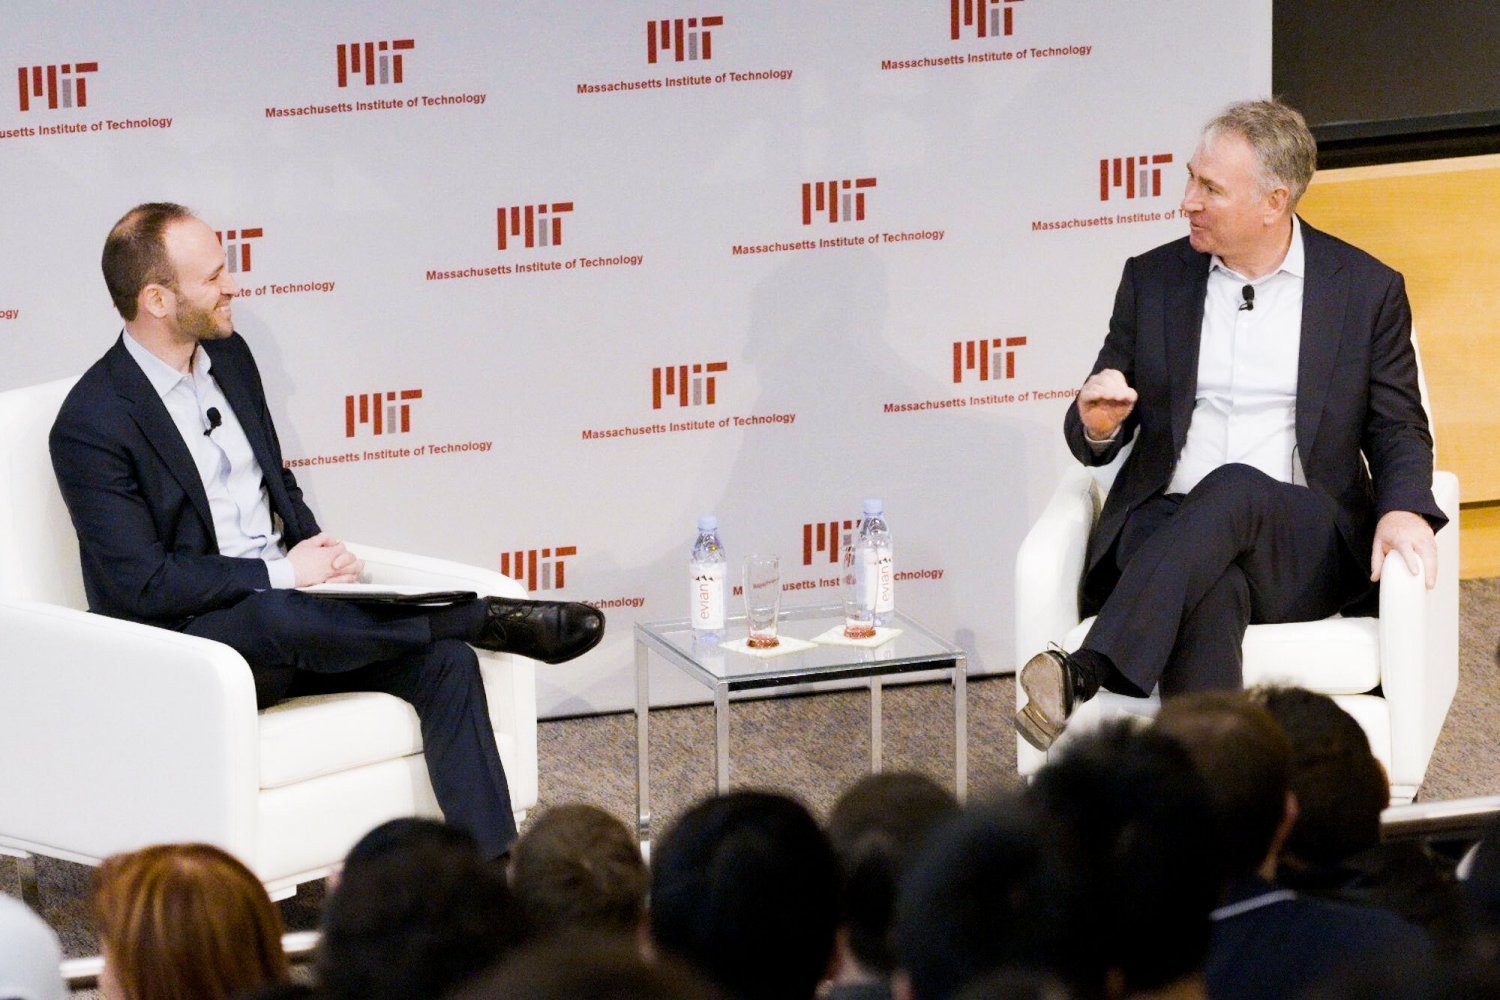 Success at the intersection of technology and finance | MIT News